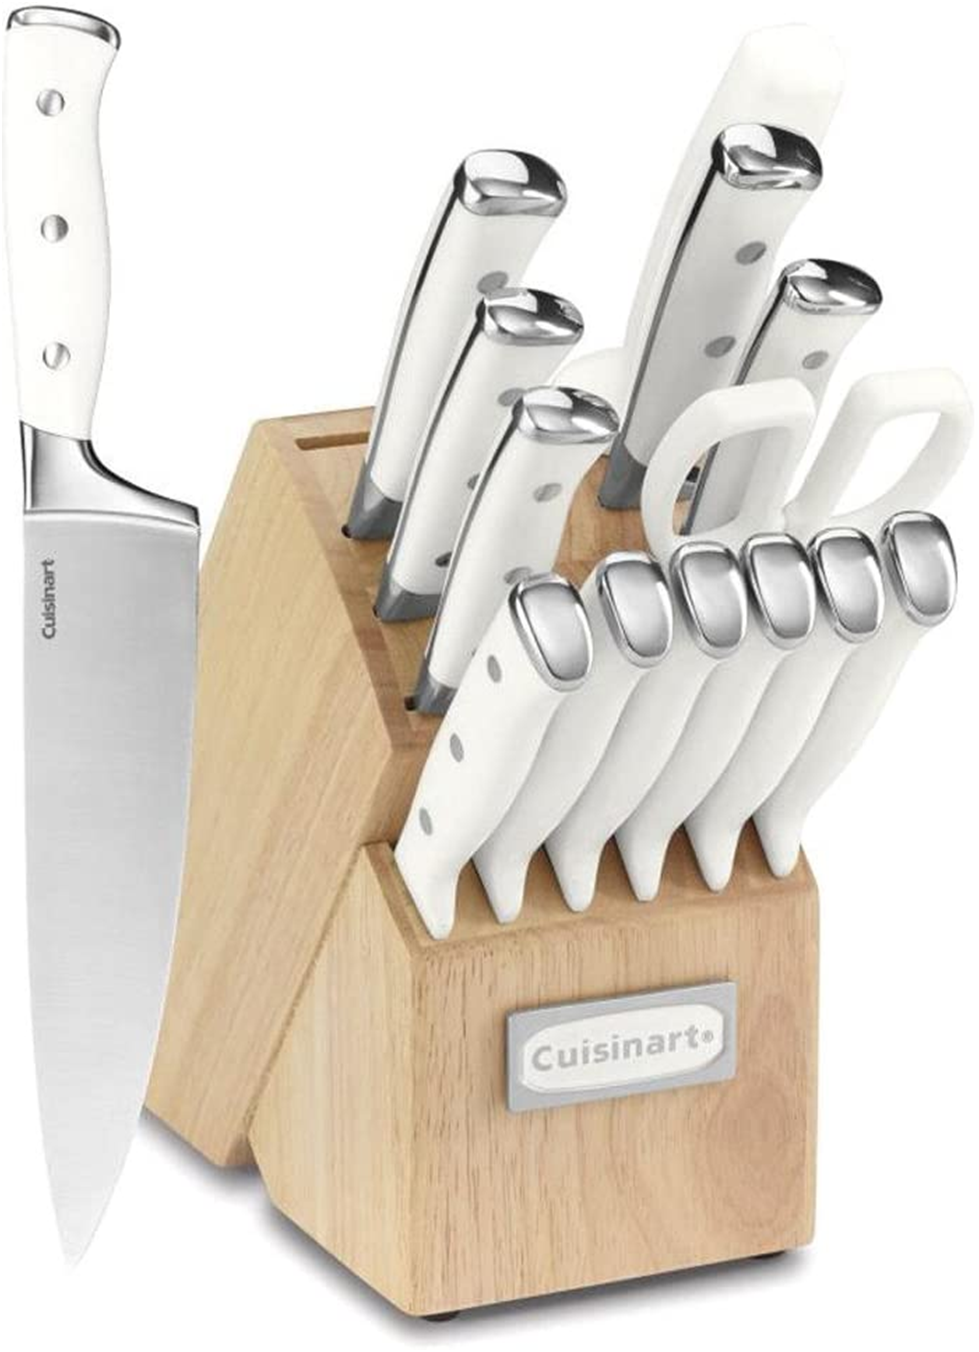 Cuisinart High-Carbon Stainless Steel